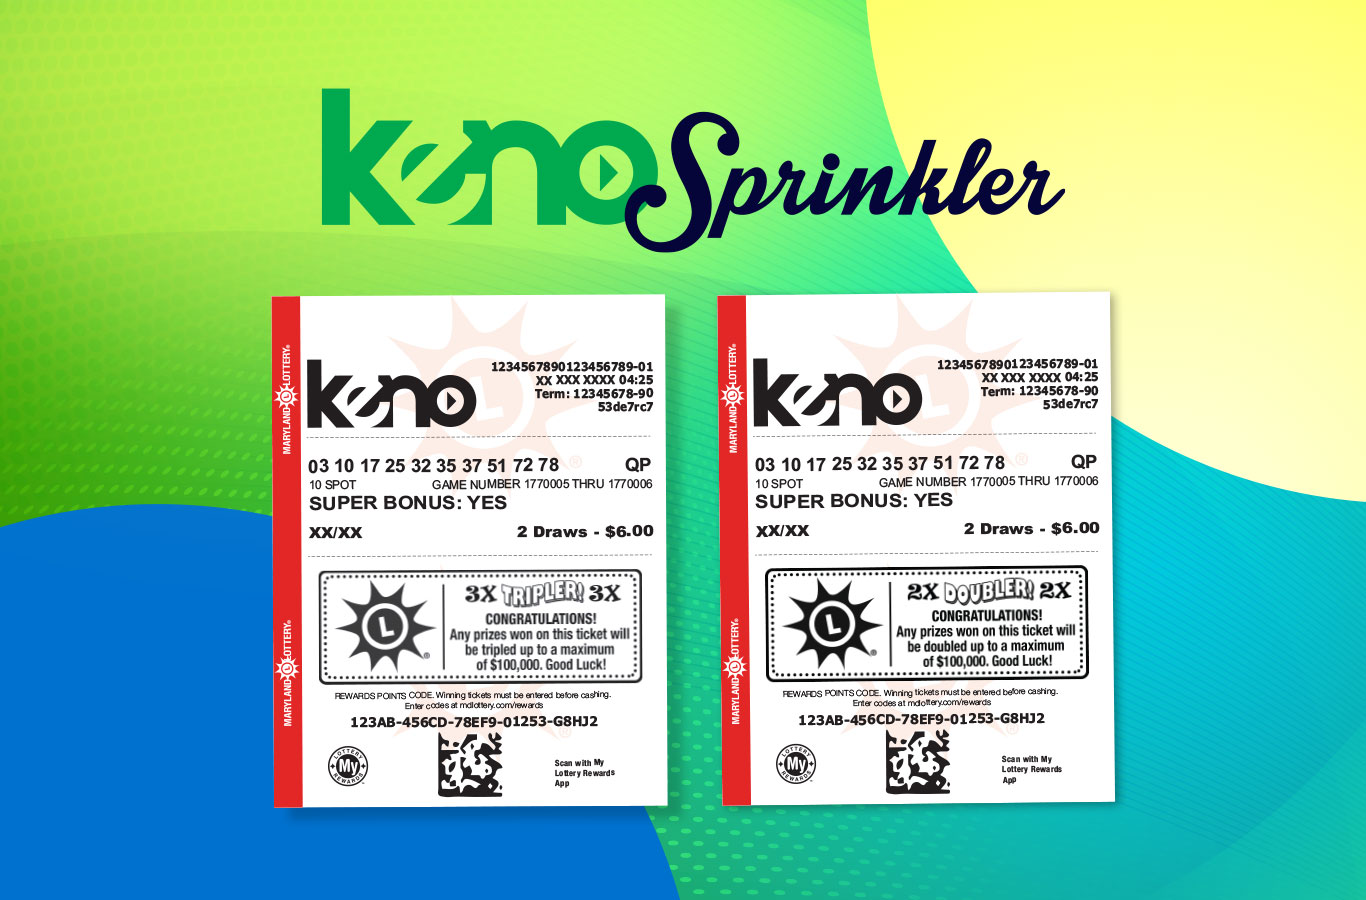 Keno Sprinkler EXTRA gives you four extra chances to win!